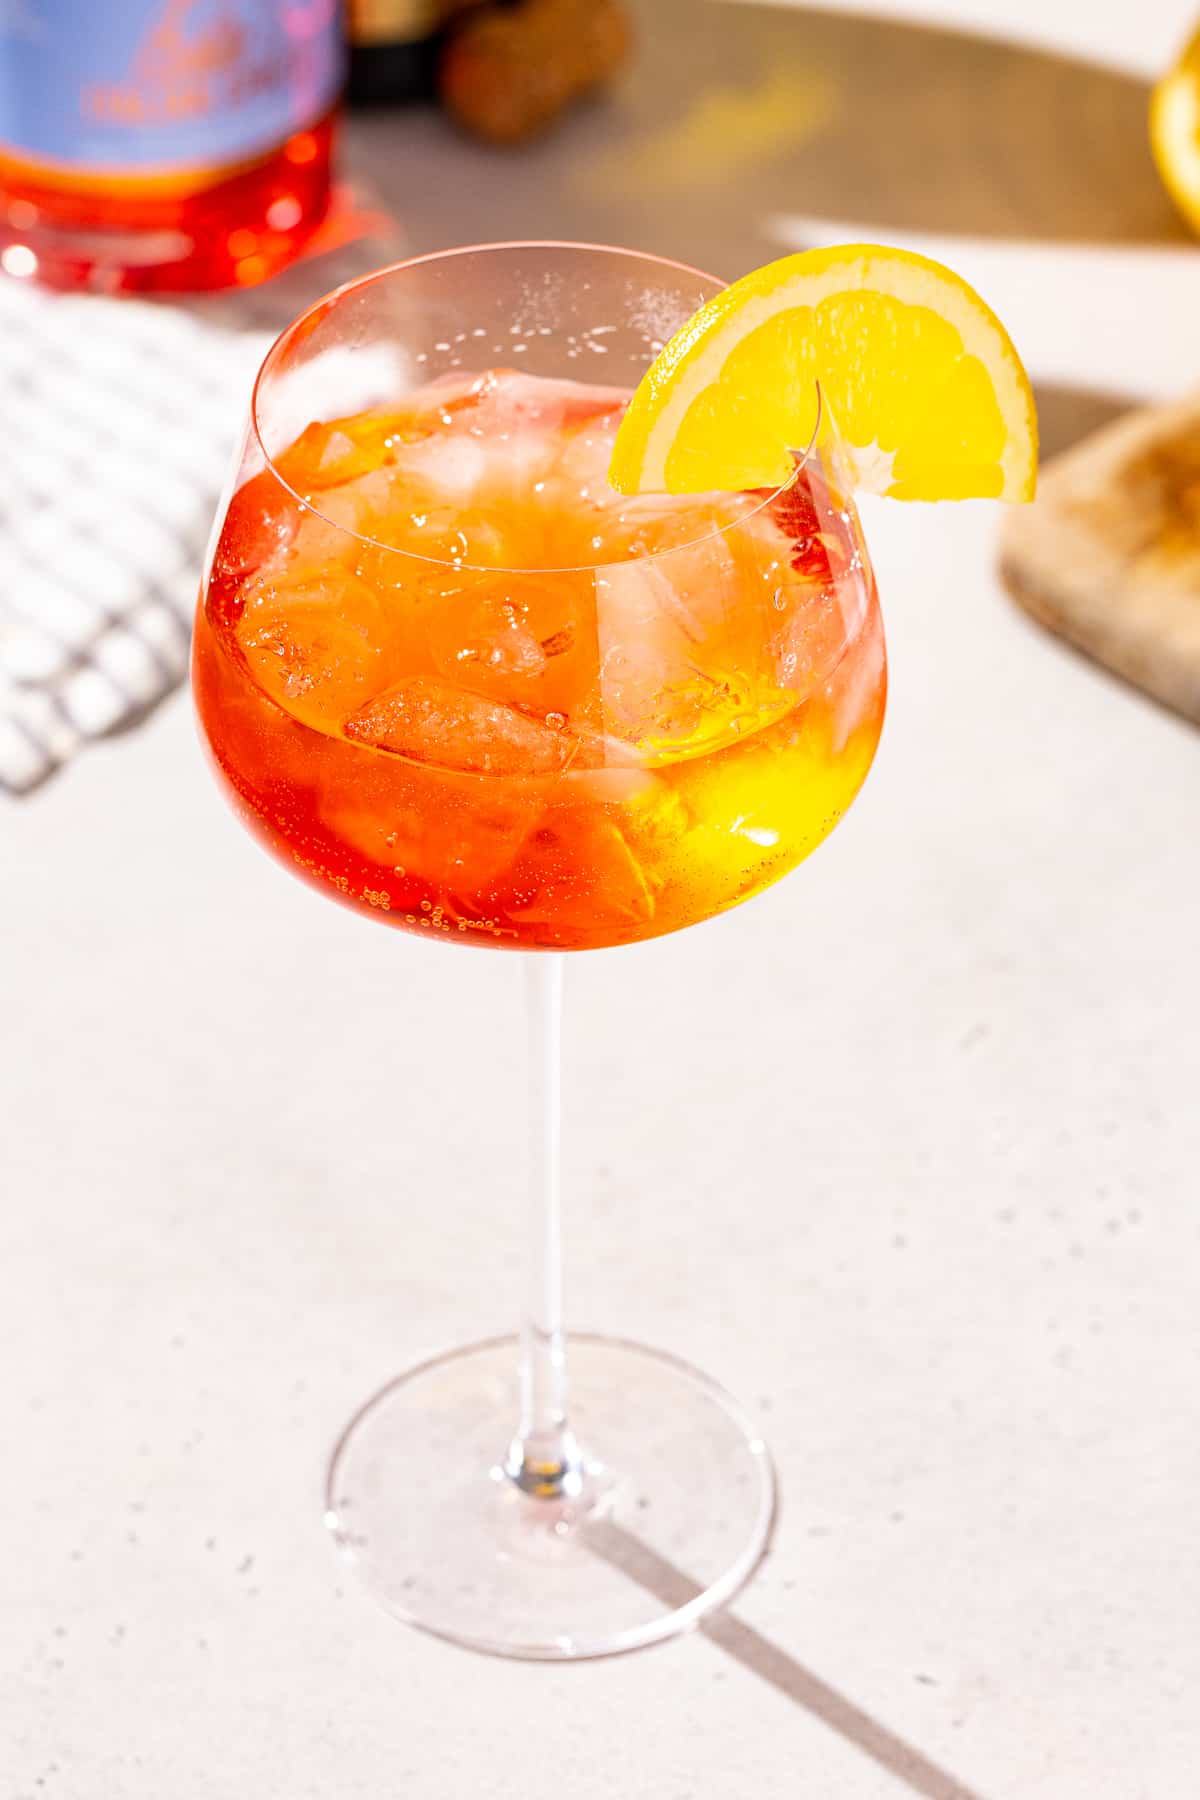 Slightly overhead view of an Aperol Spritz mocktail on a countertop. Some ingredients can be seen in the background.